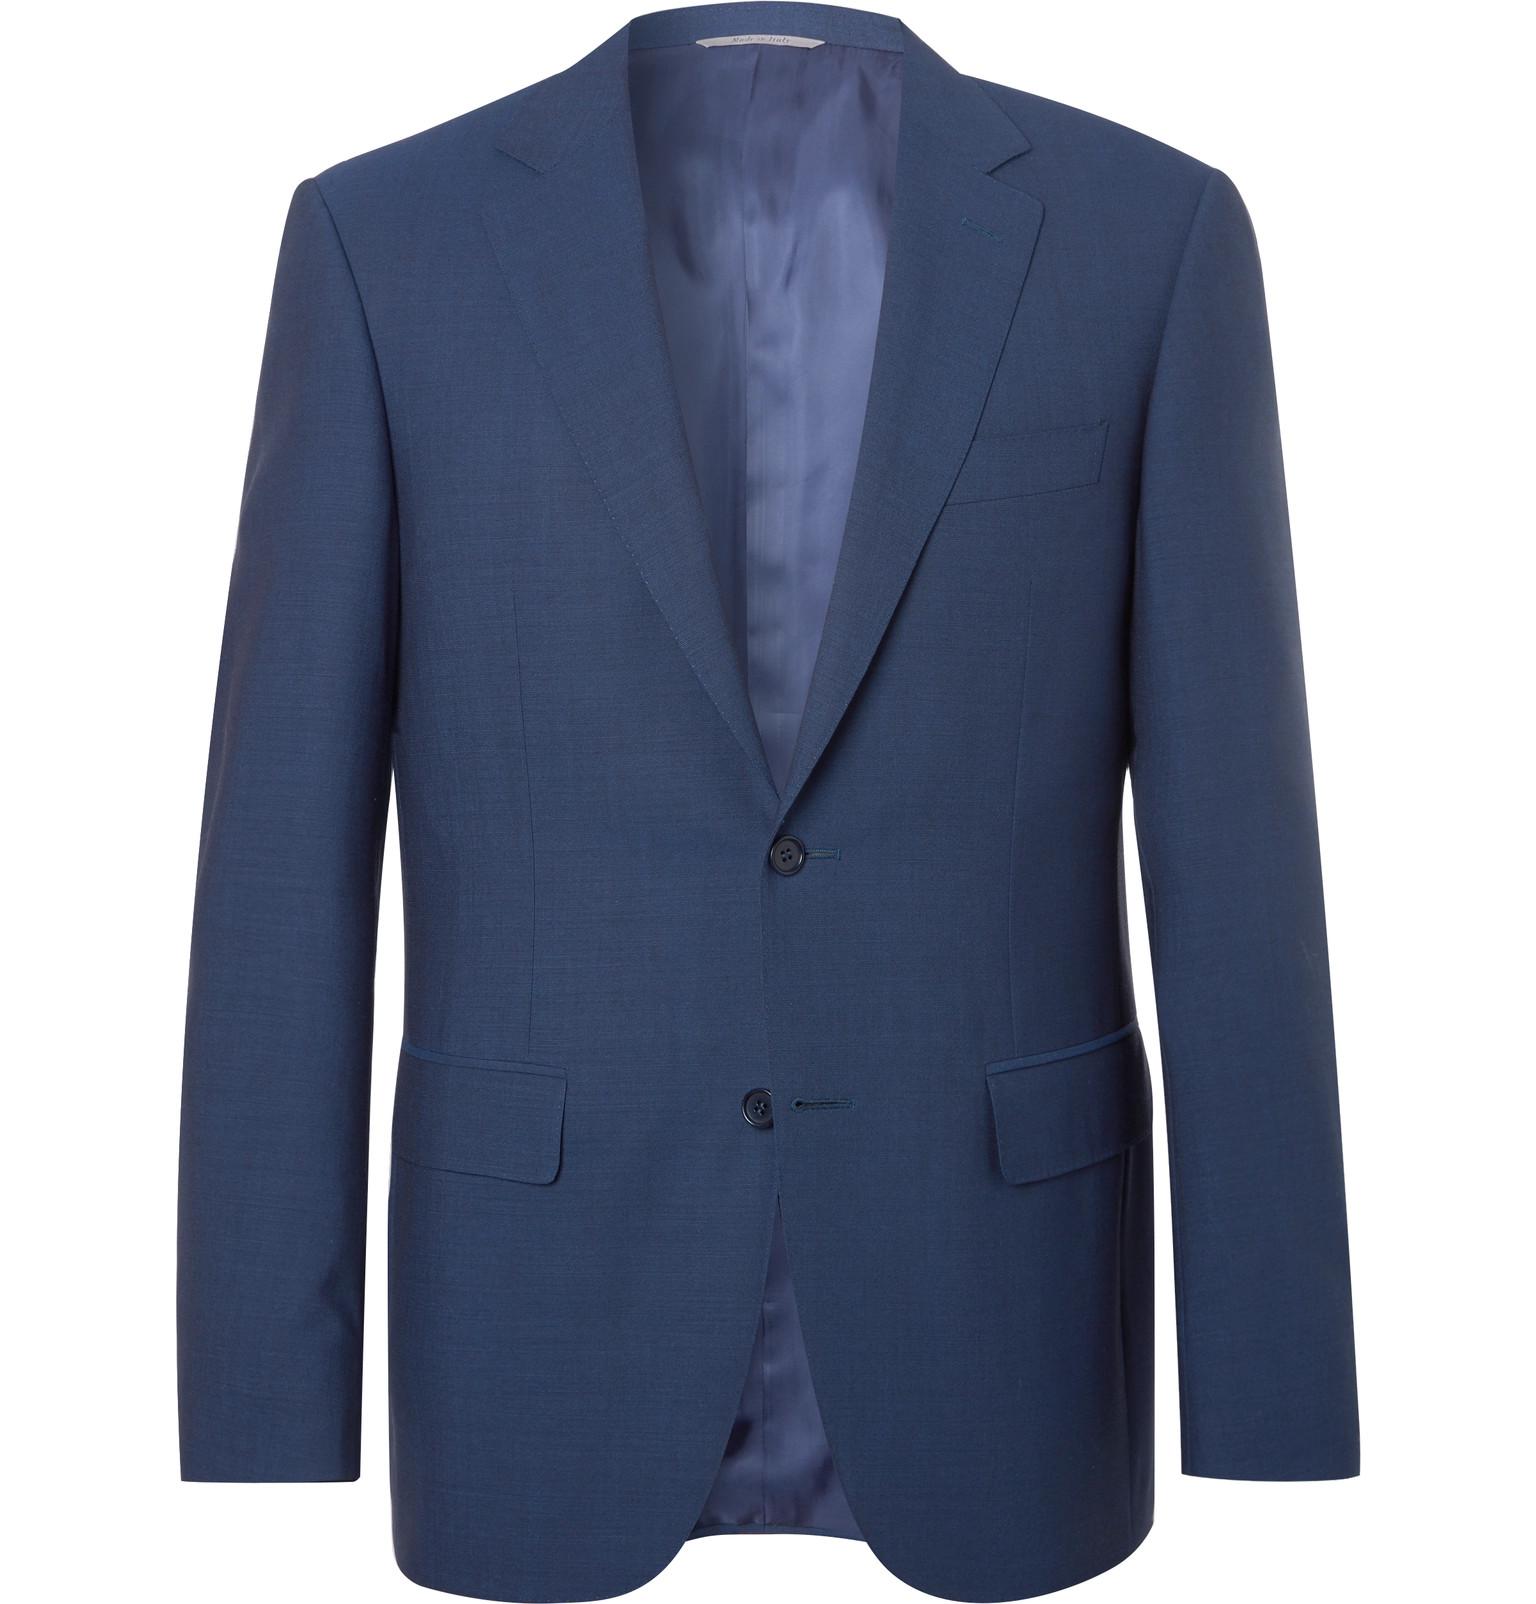 Canali Navy Slim-fit Super 140s Wool Suit Jacket in Blue for Men - Lyst